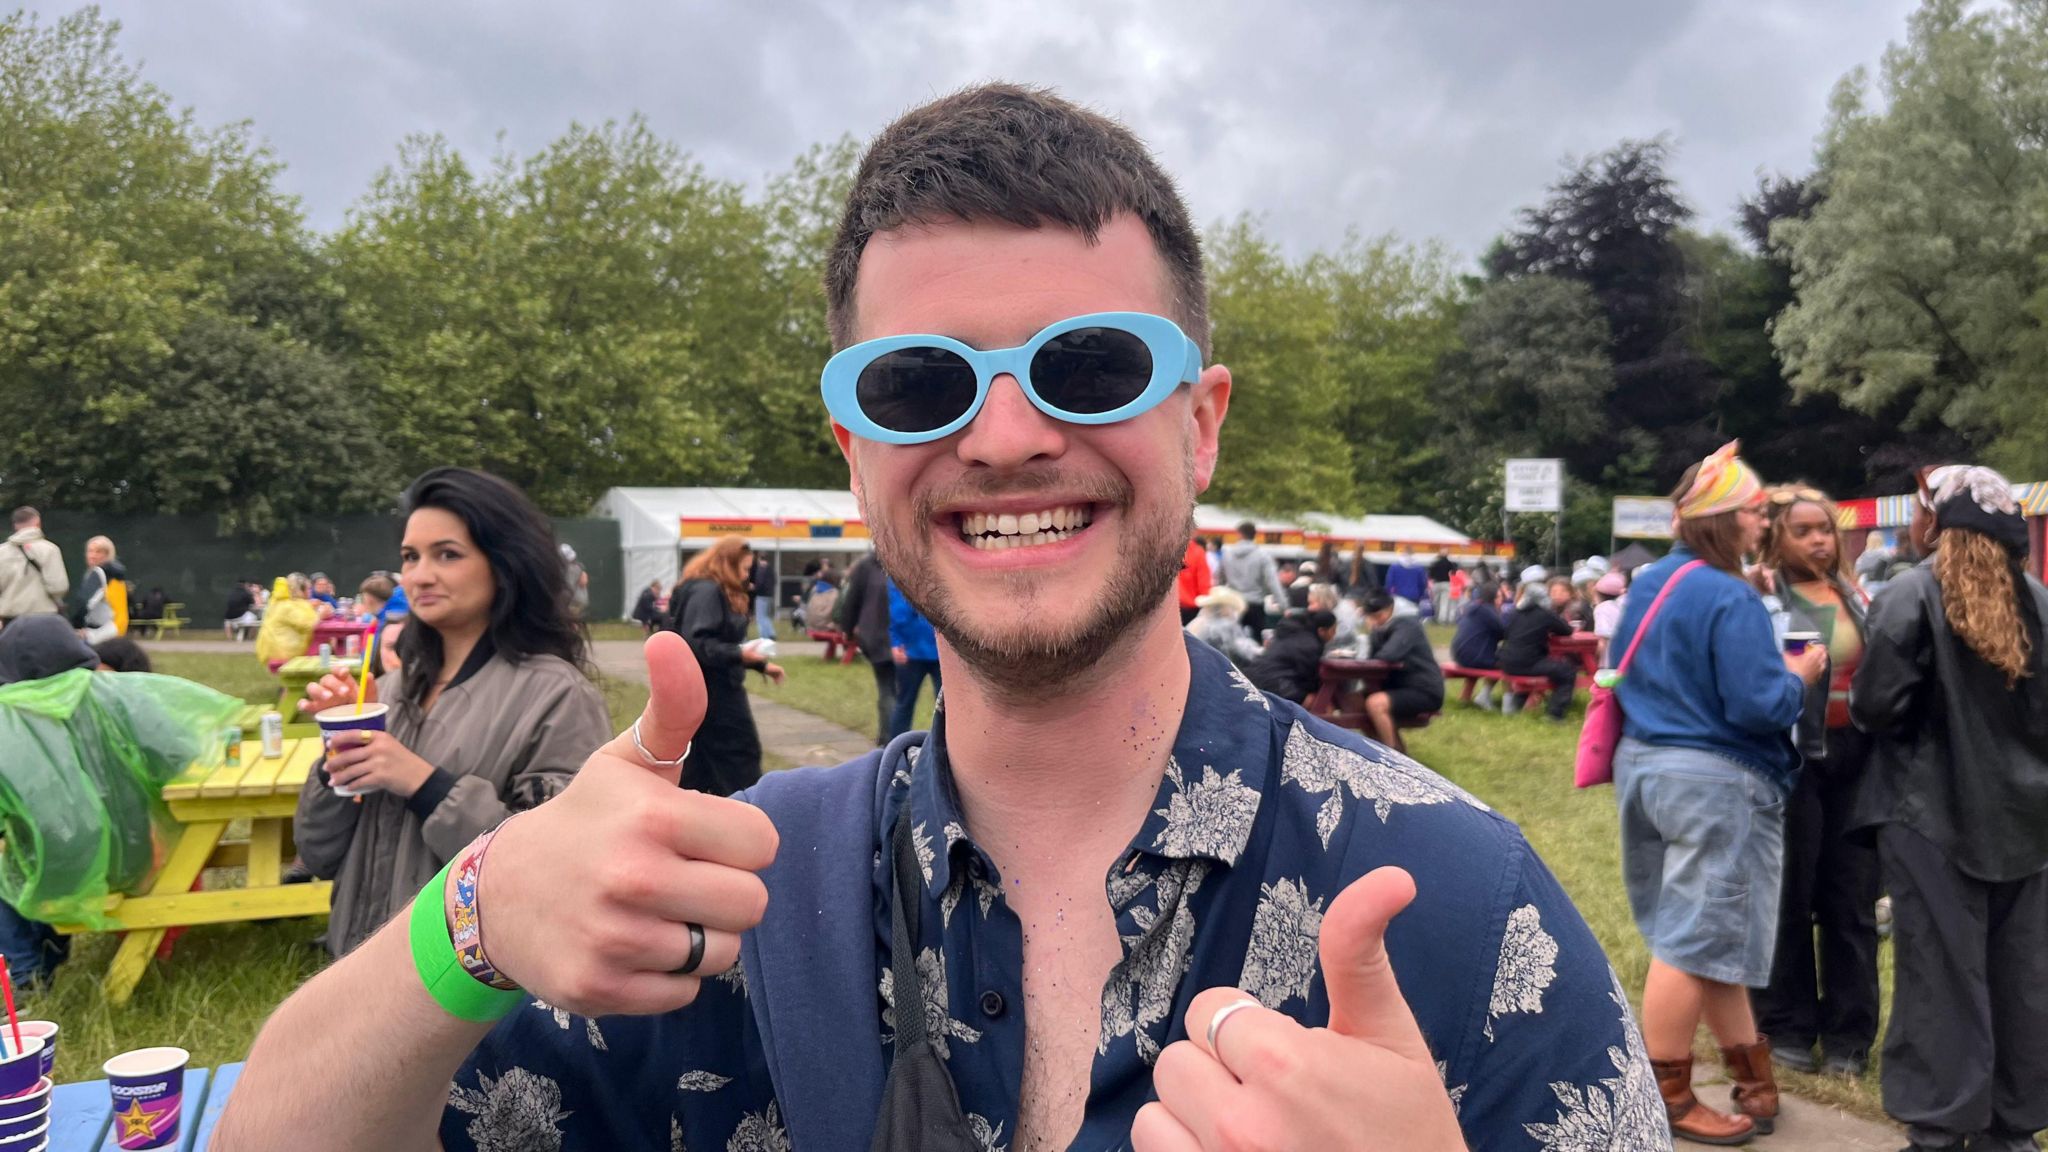 Joshua Burgess gives a thumbs up to the camera from Parklife Festival in Manchester 